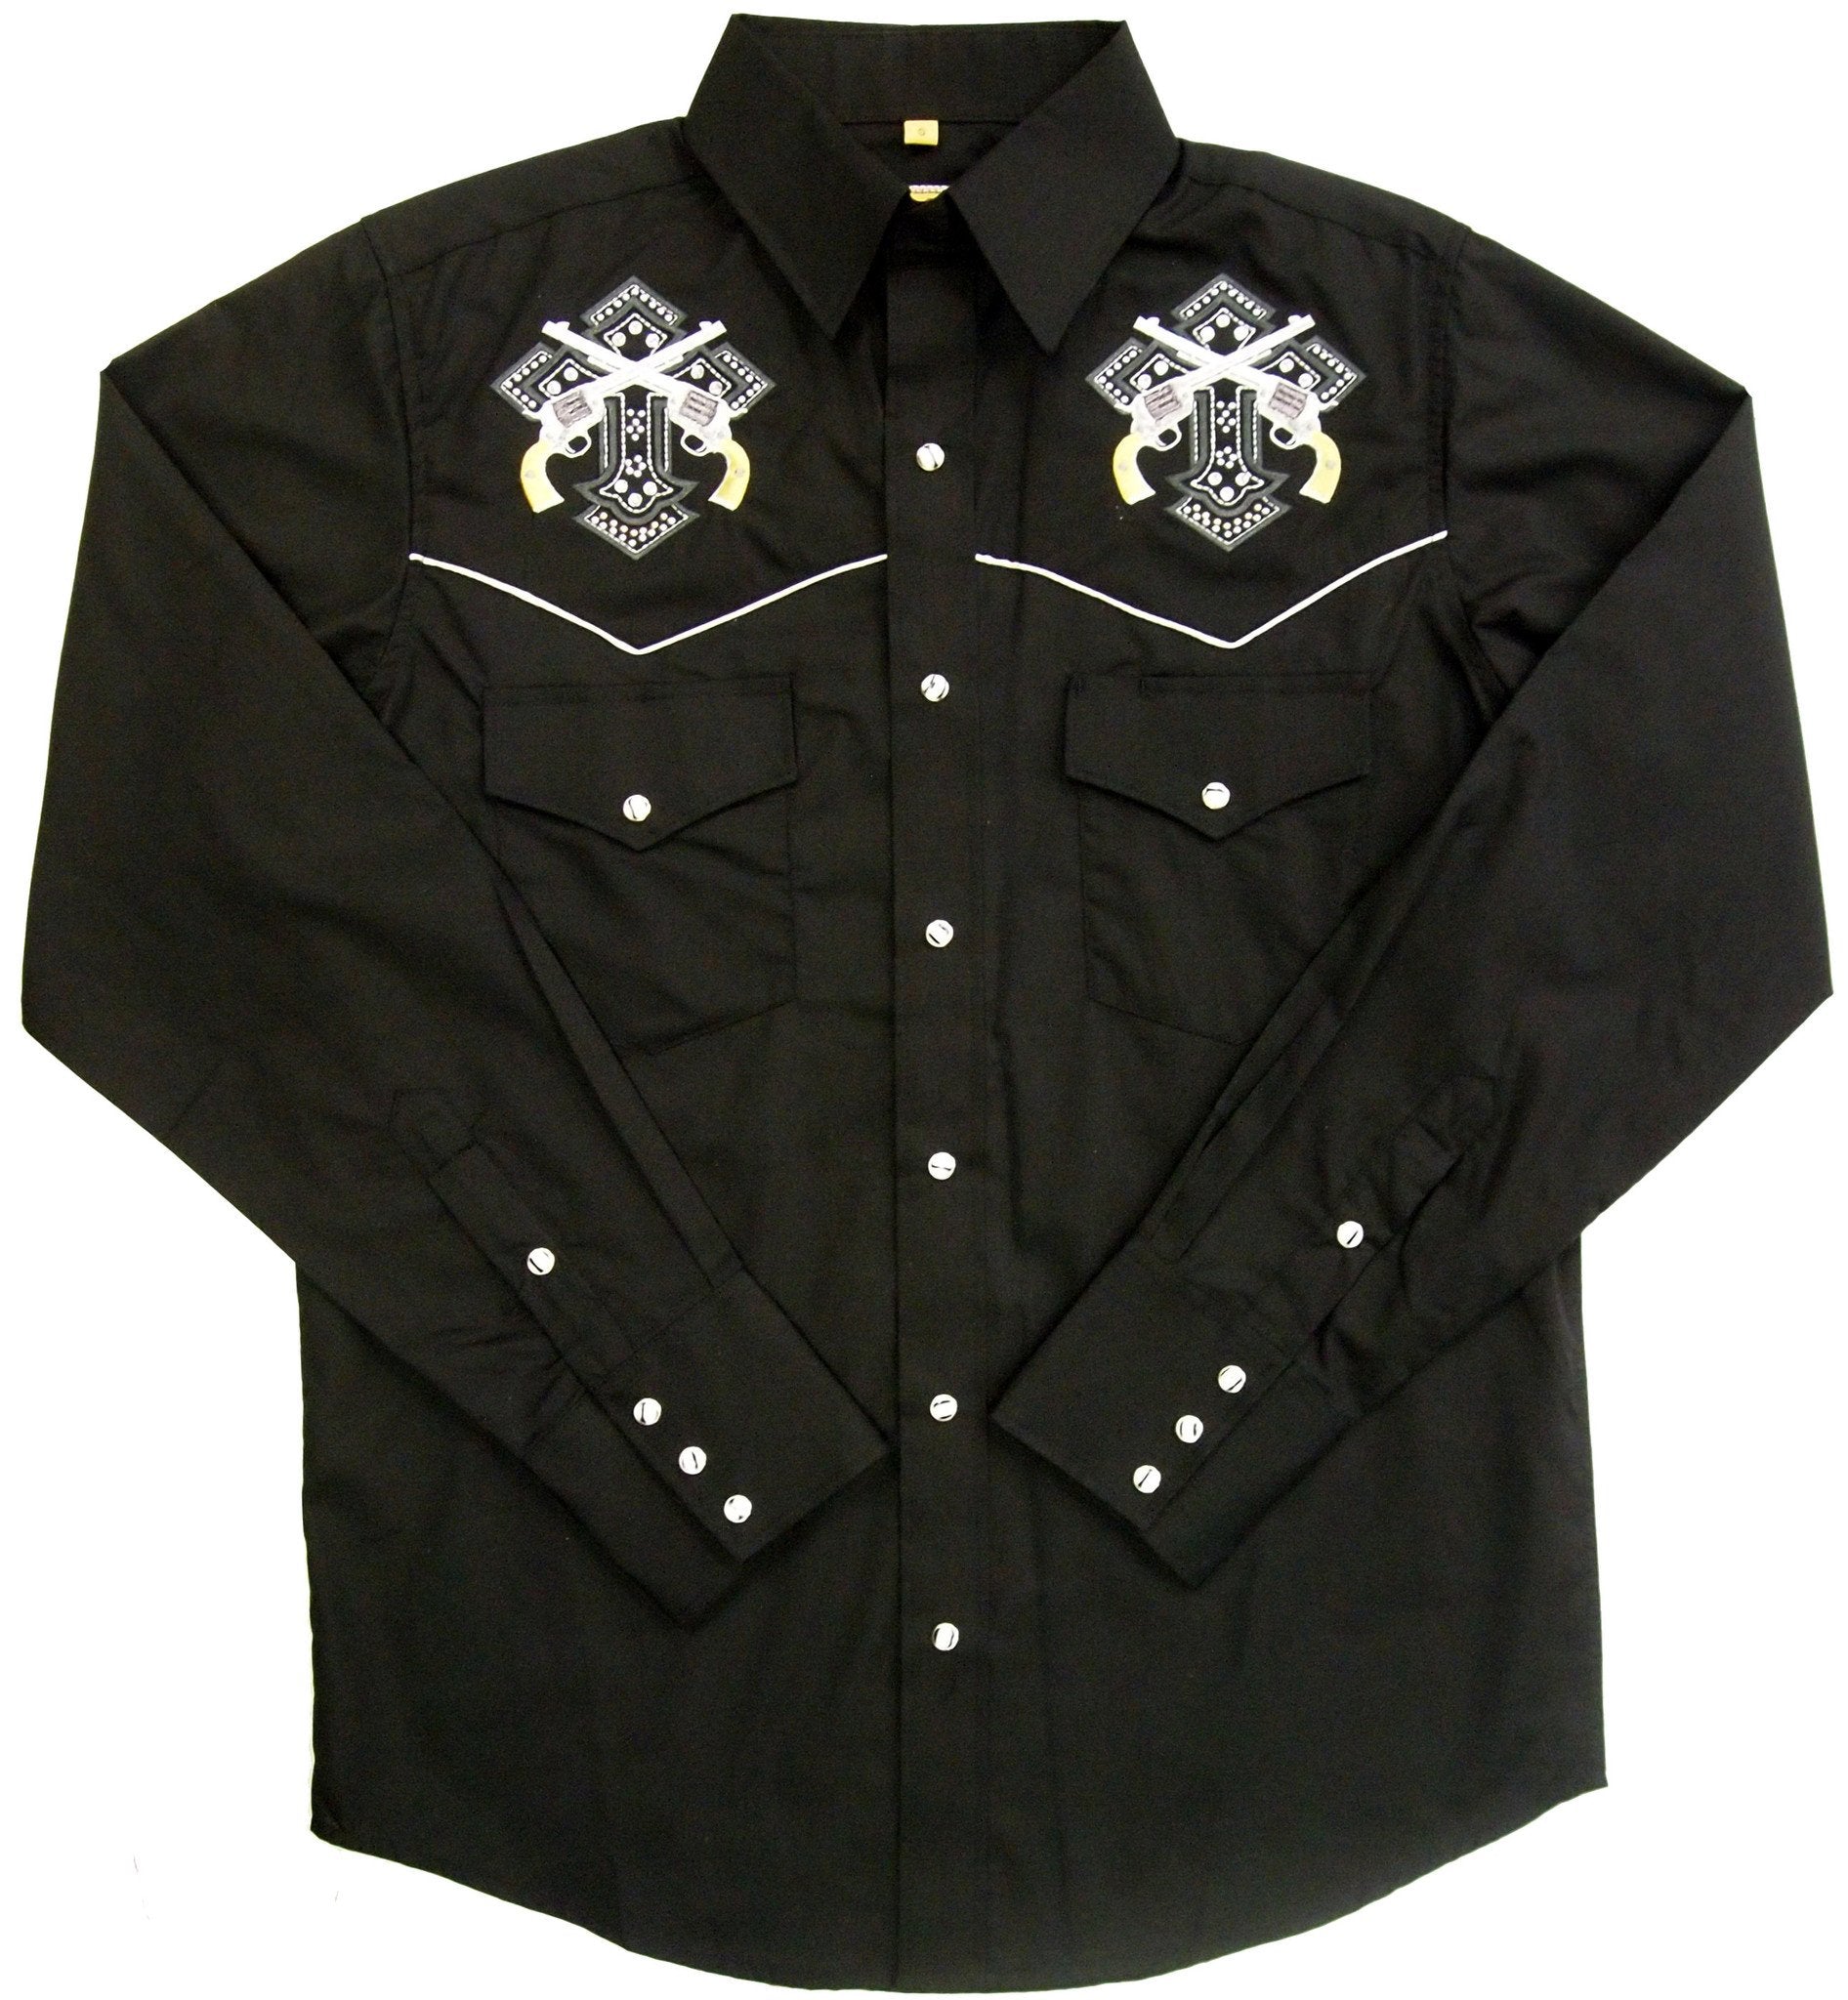 White Horse Apparel Men's Embroidered Western Shirt with Crosses and Pistols Front